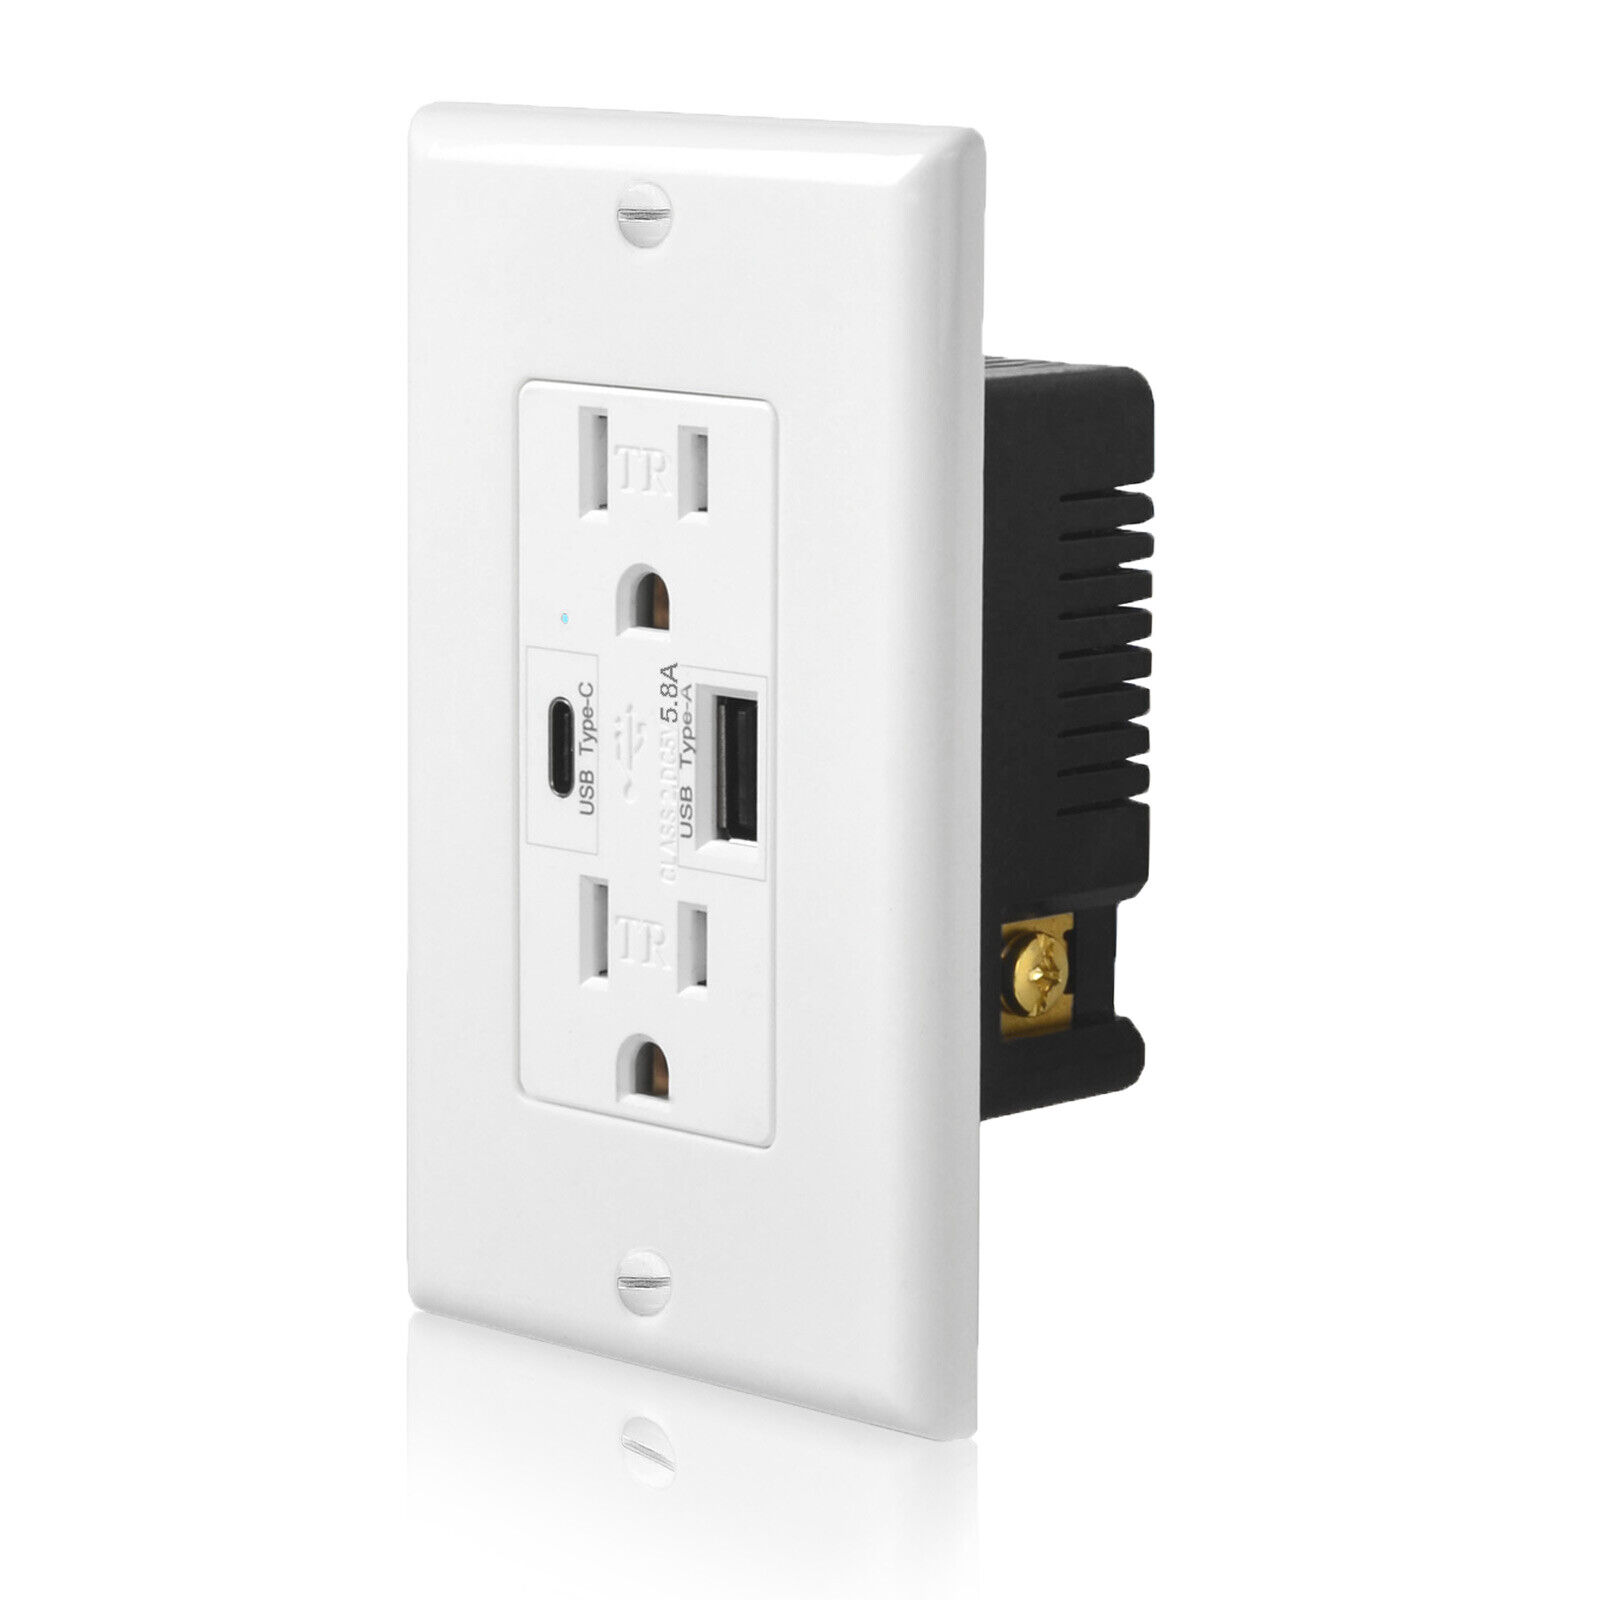 5.8A Type-C/A USB Wall Outlet Charger 15A 125Volt TR Receptacle with plate UL US